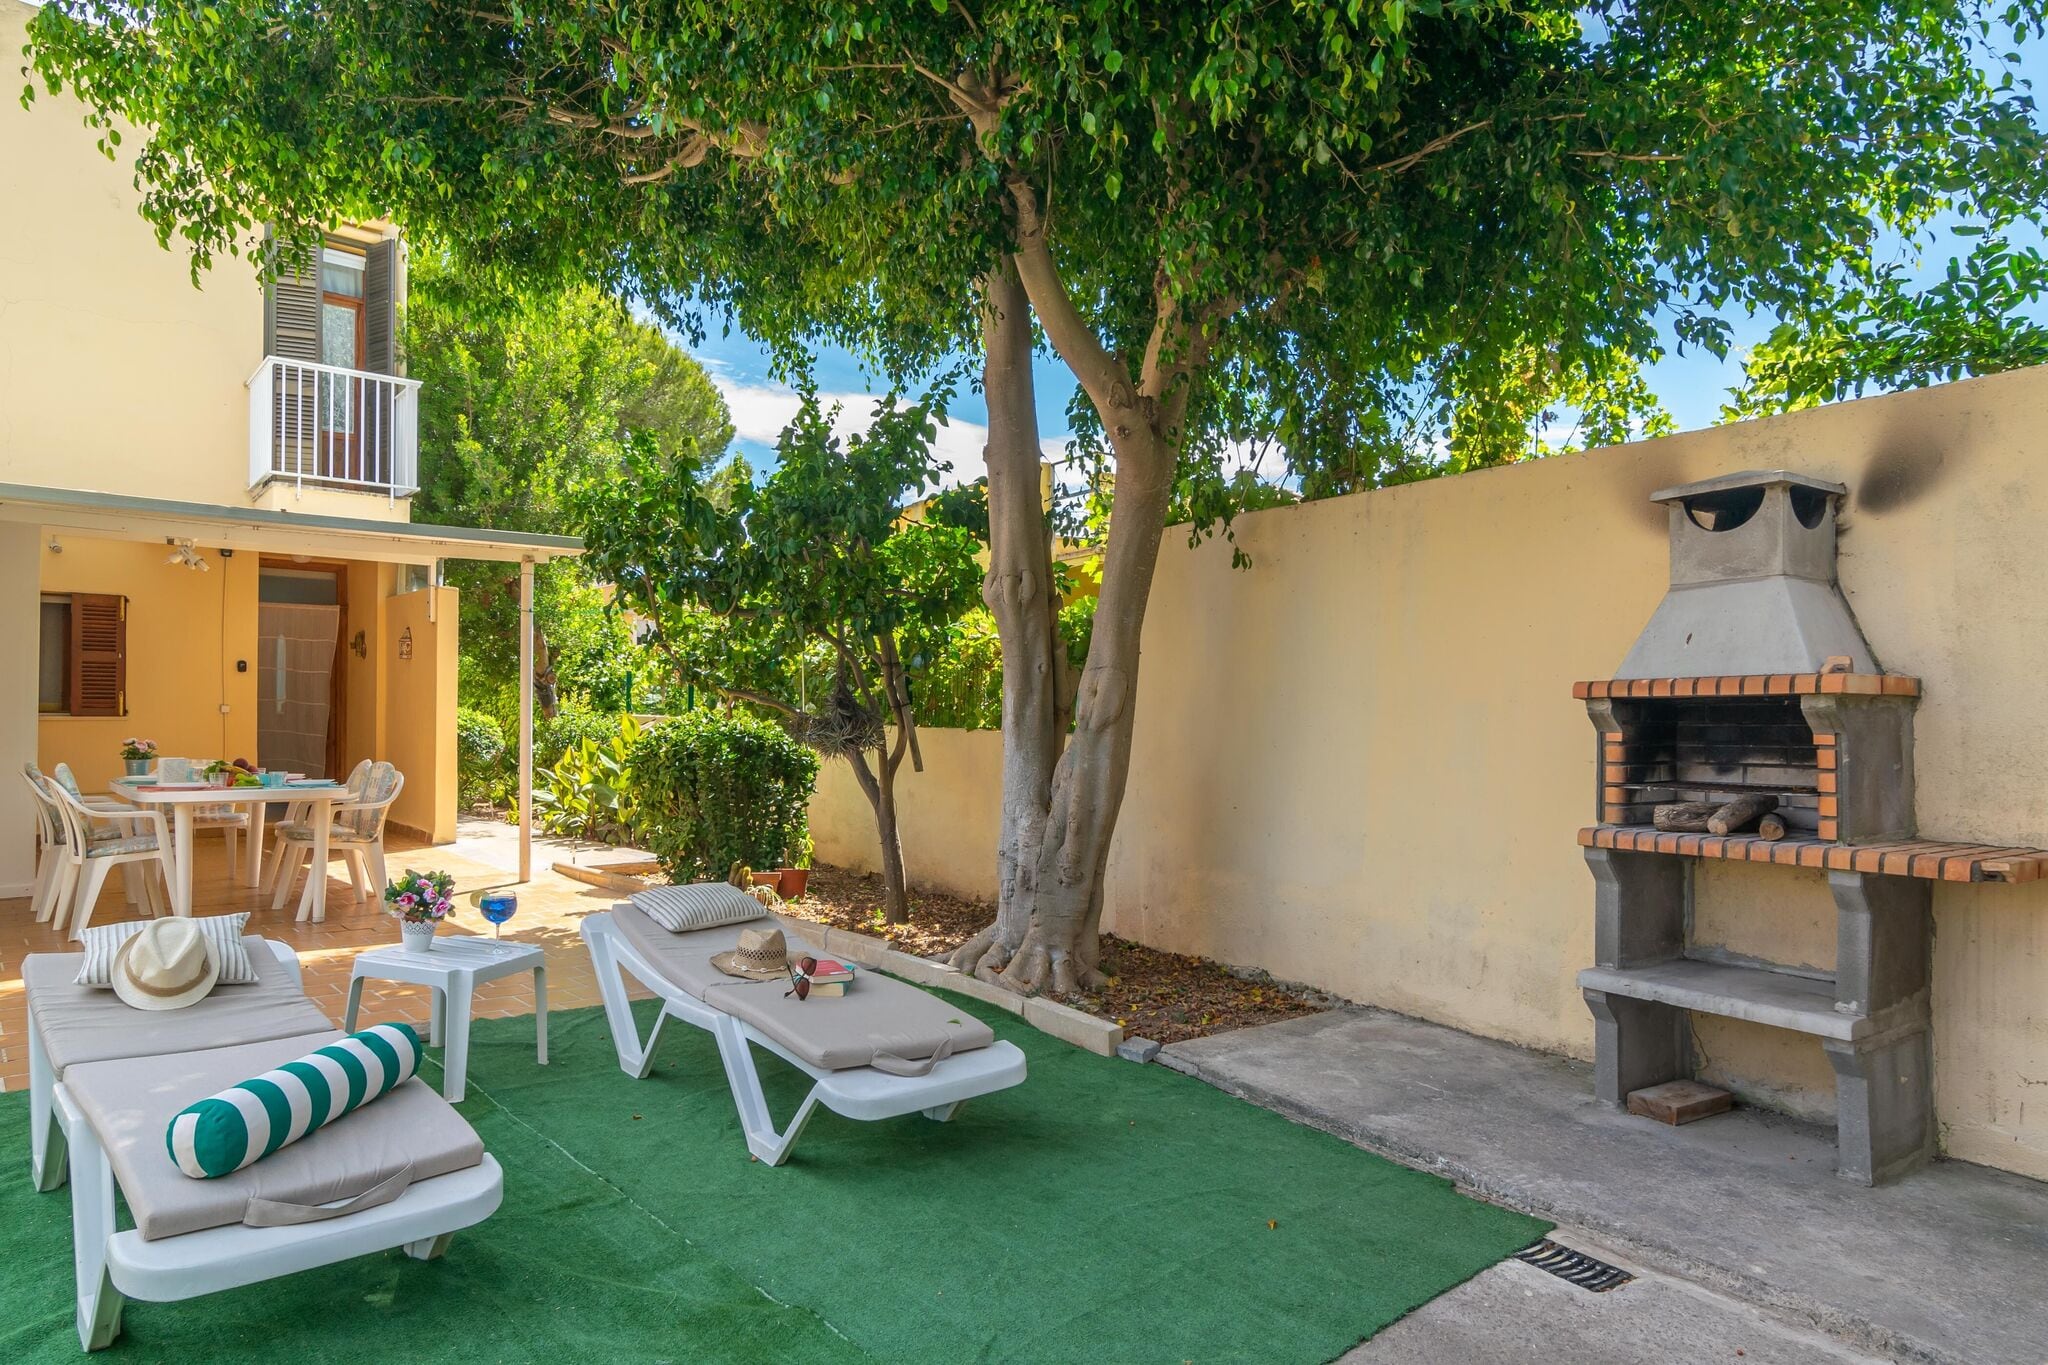 BELLA - Chalet for 5 people in Port d'Alcúdia.